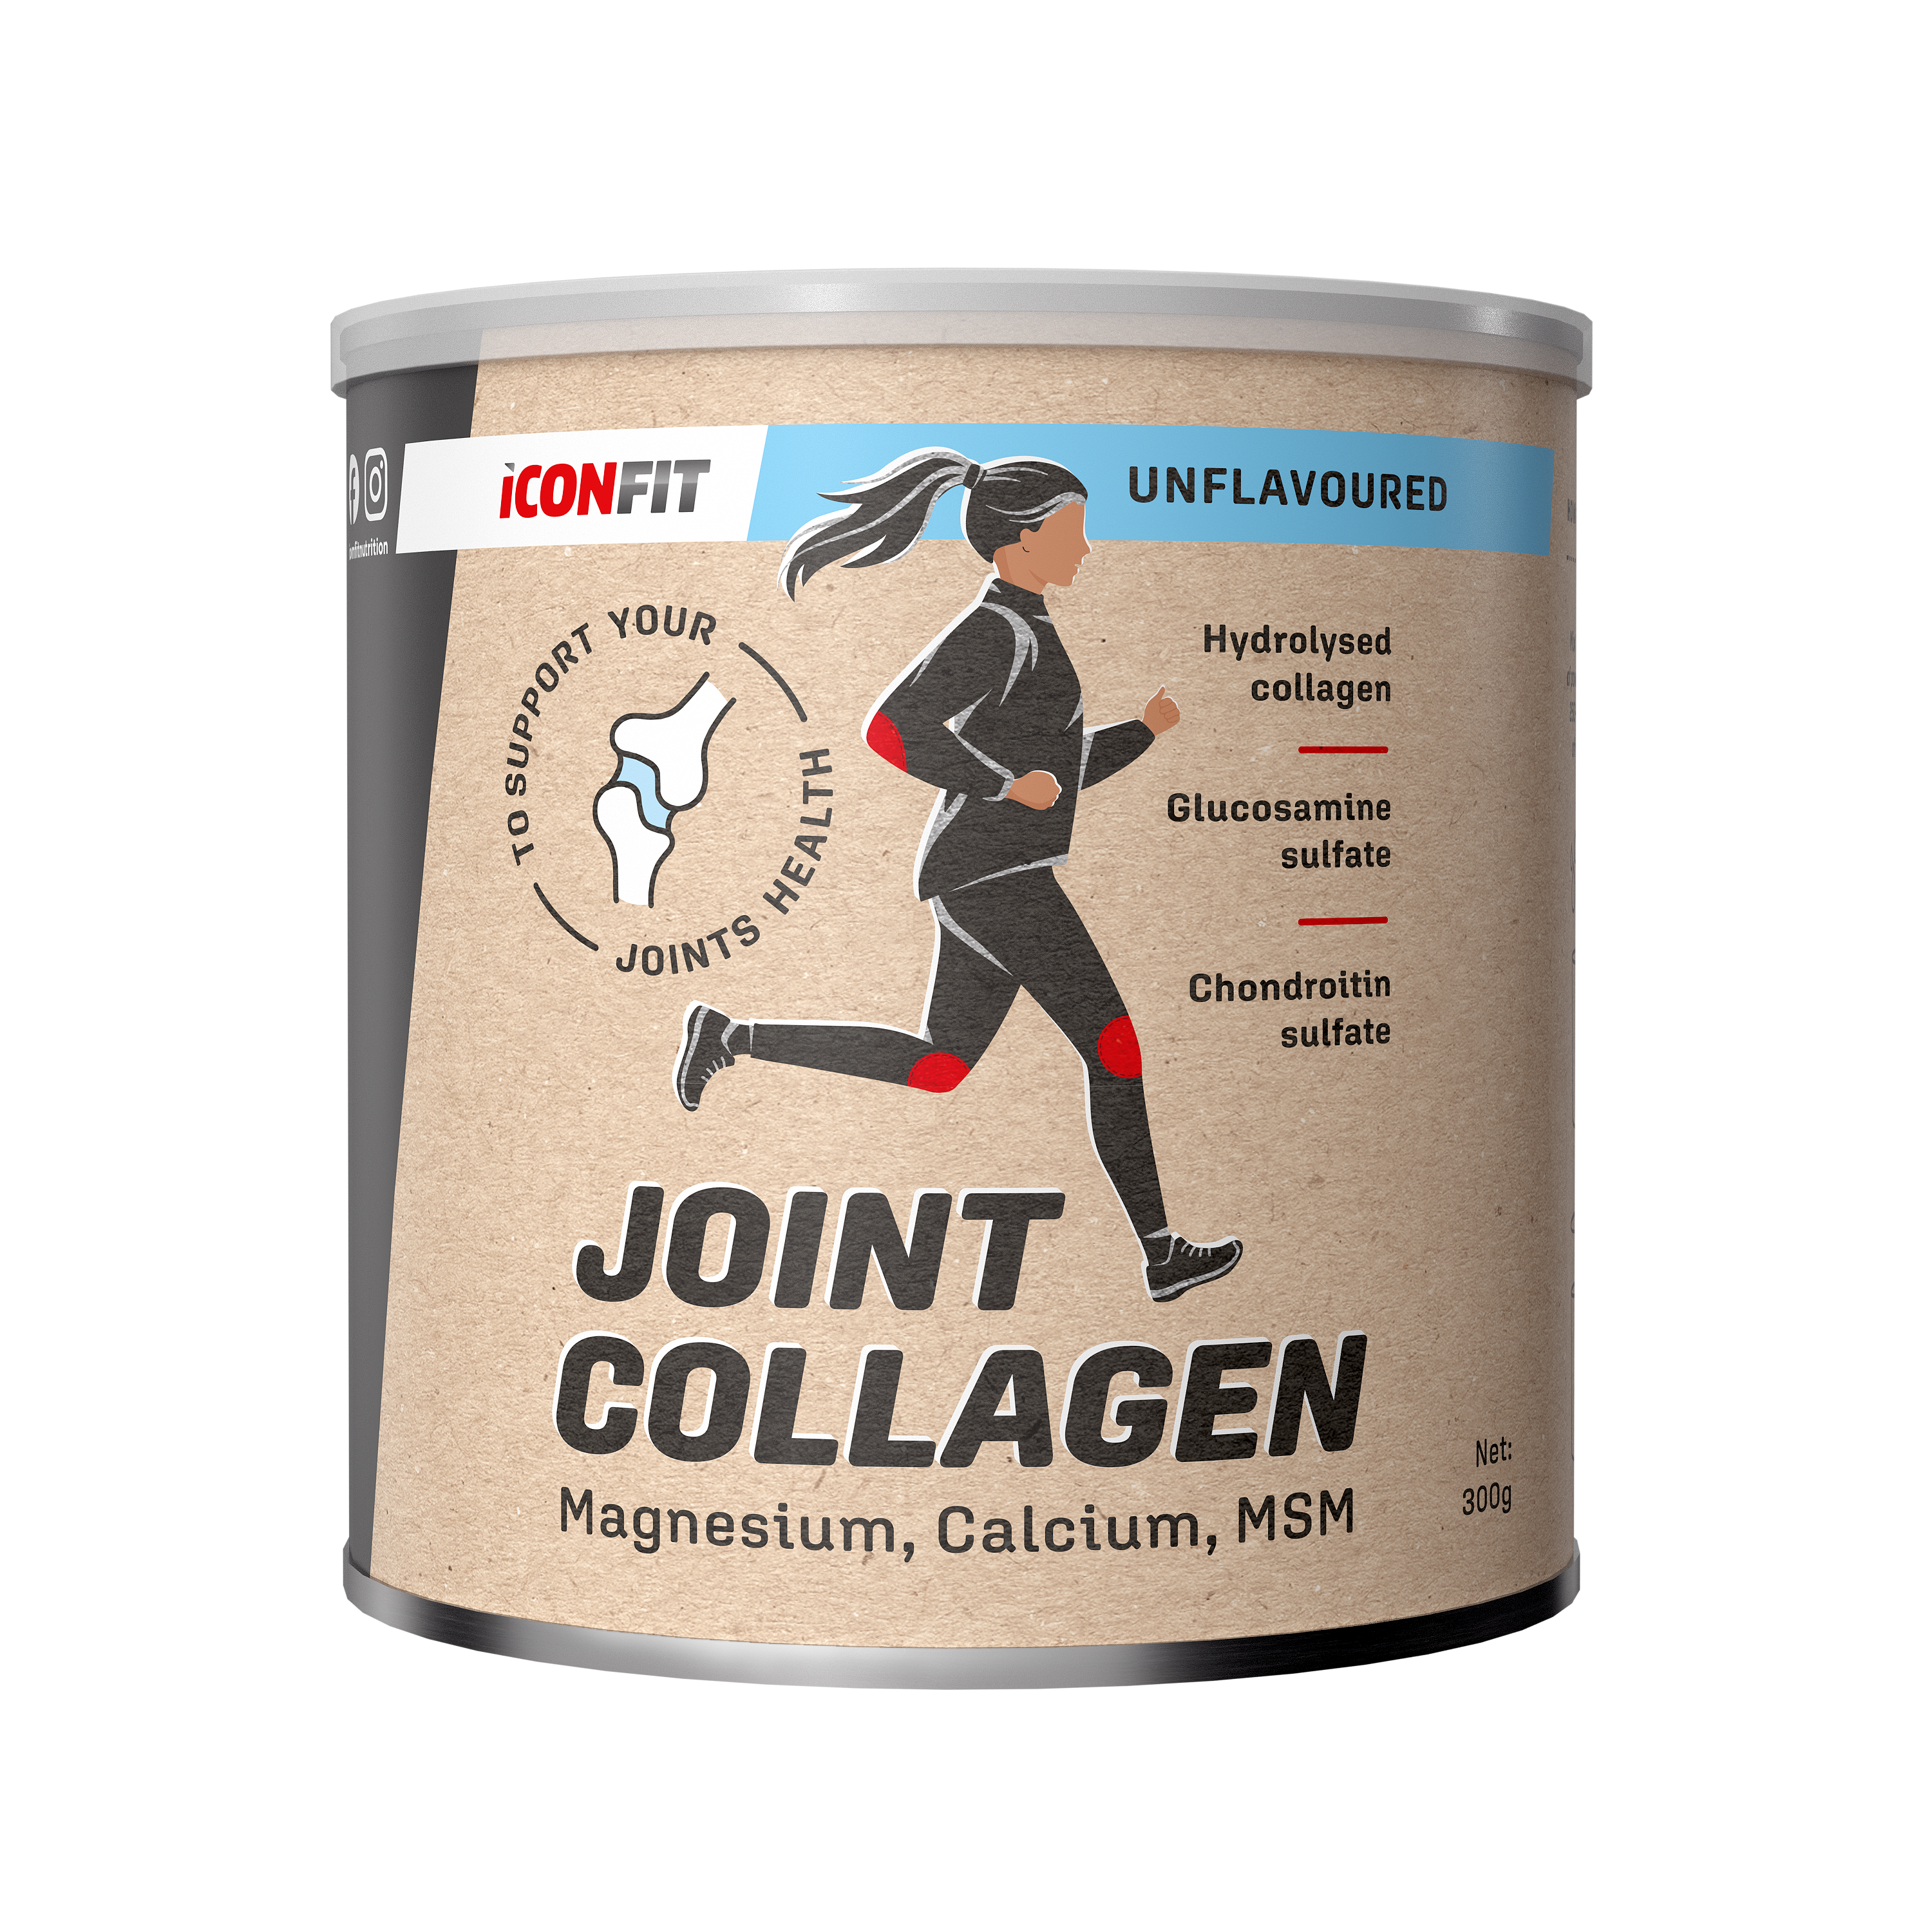 ICONFIT-Joint-Collagen-Unflavoured-300g